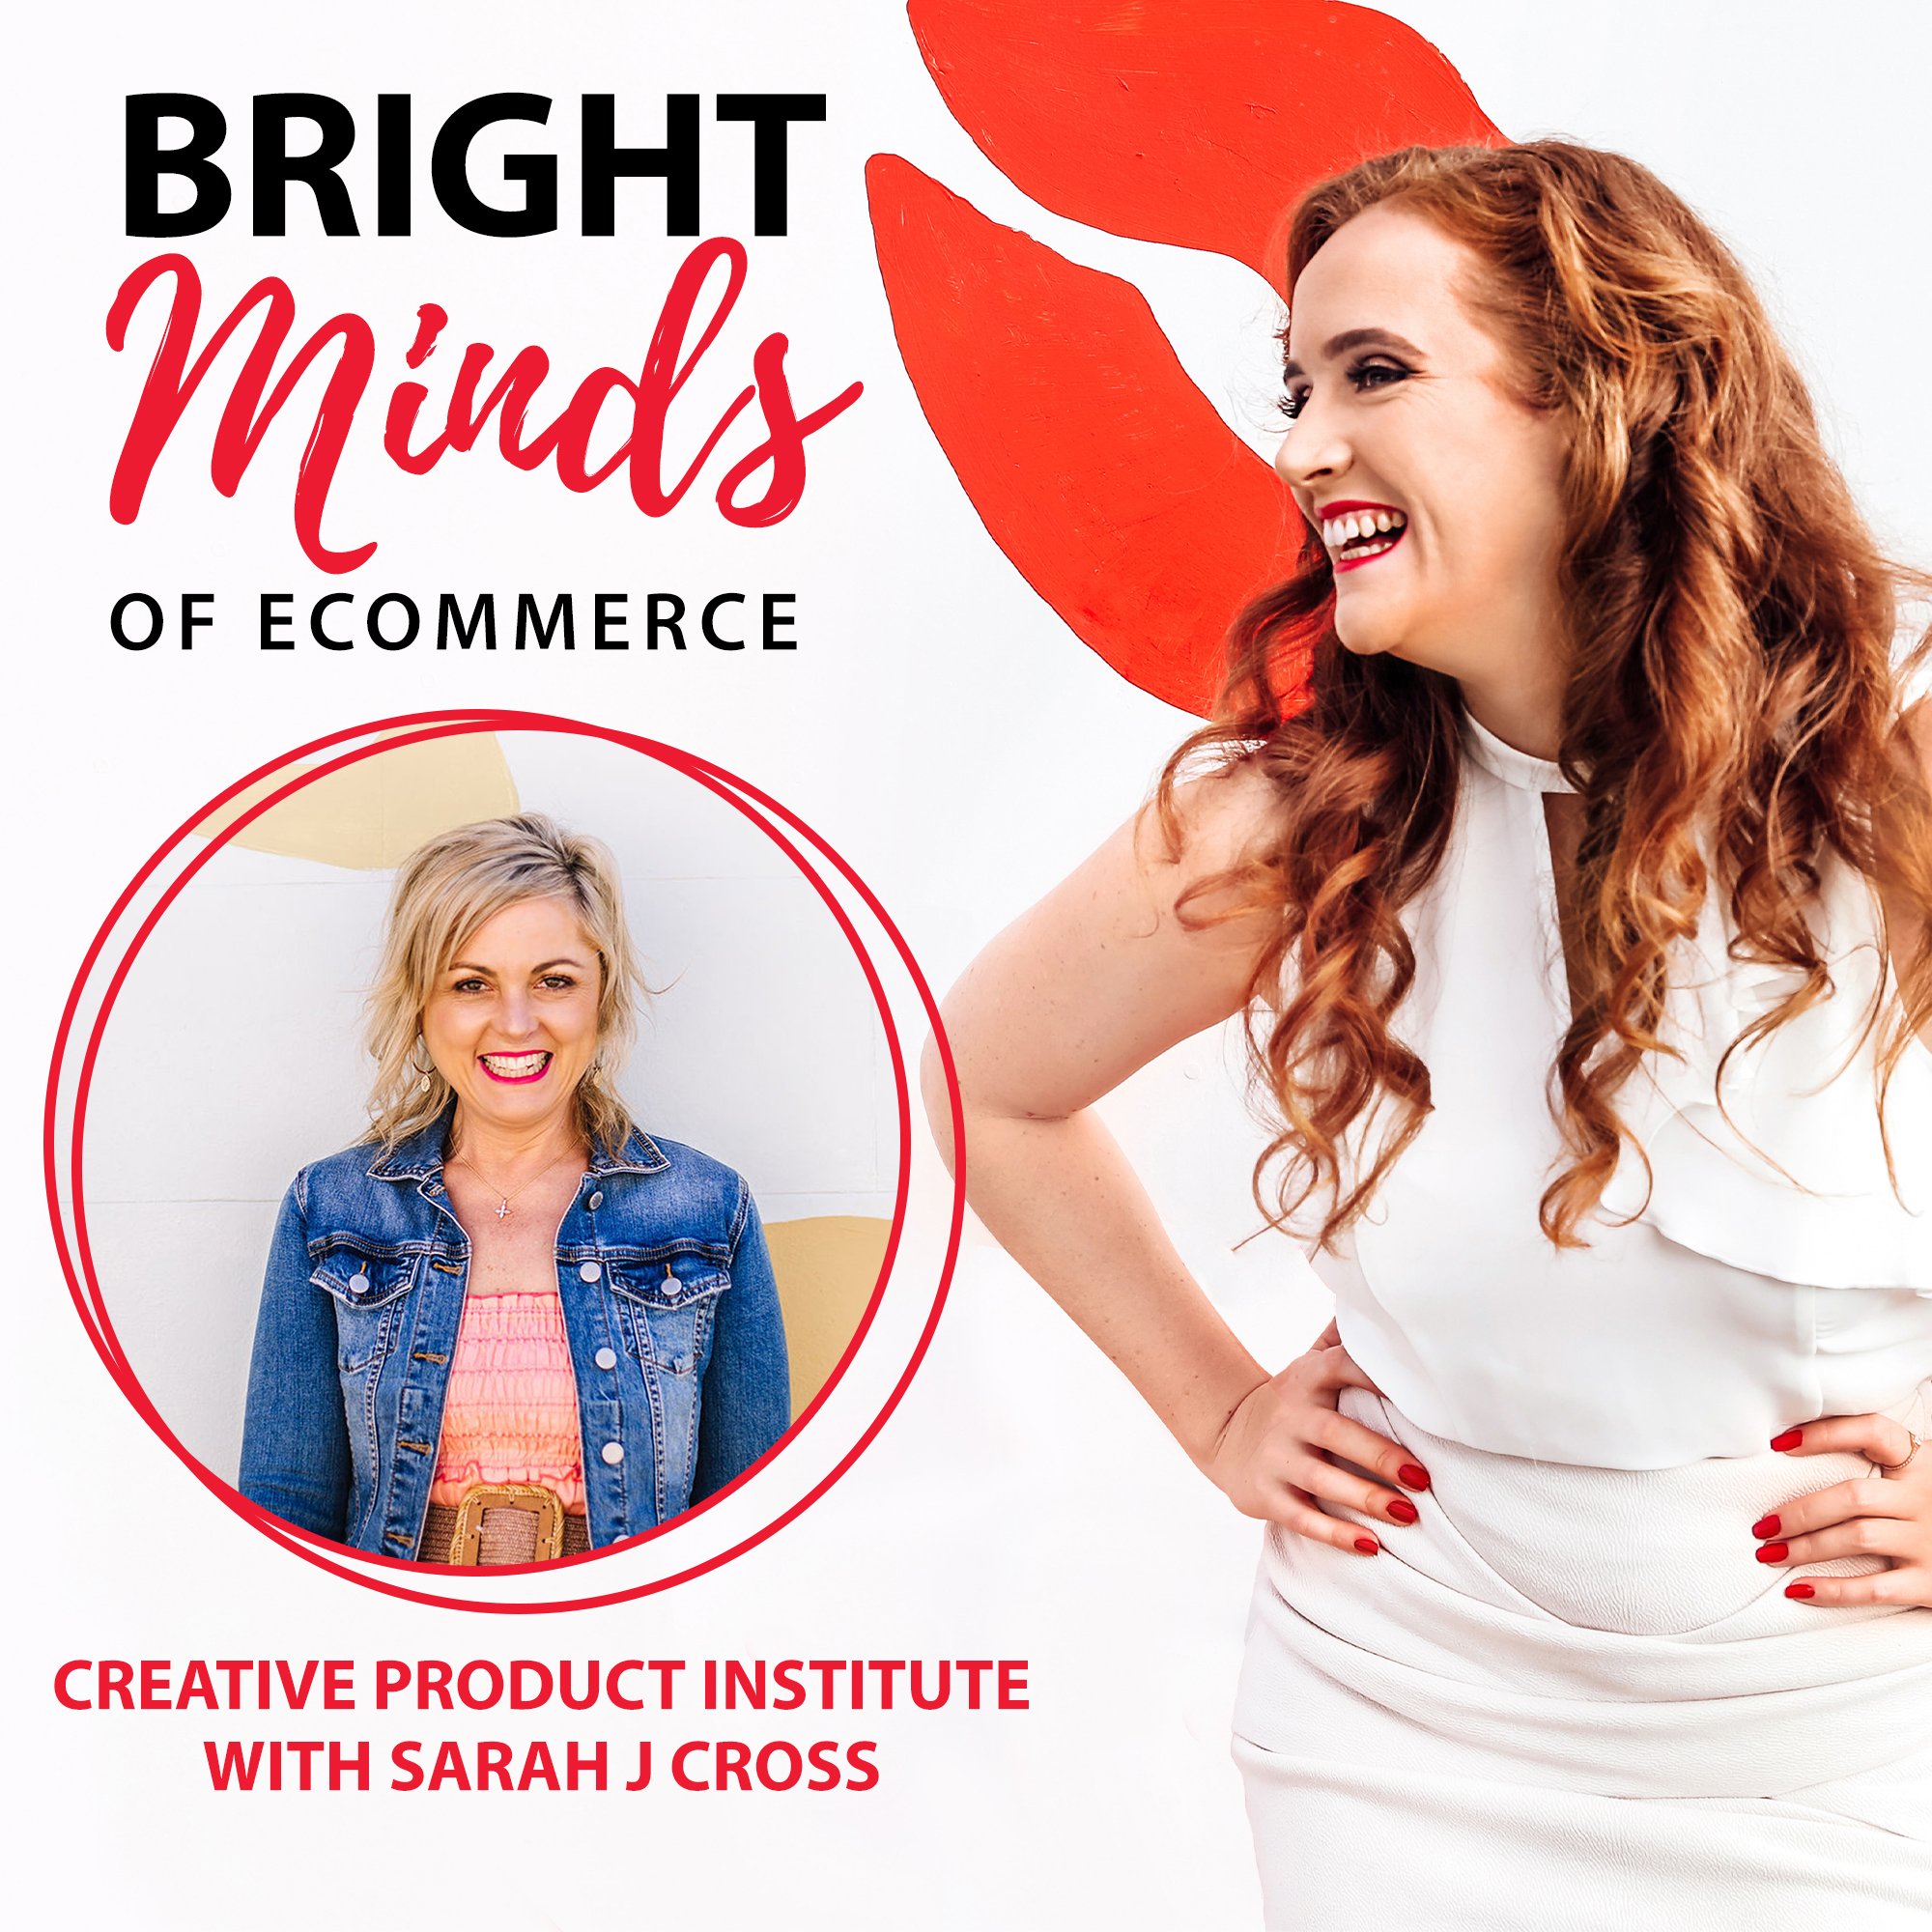 #28 Wholesaling for greater profit with Sarah J Cross from the Creative Product Institute